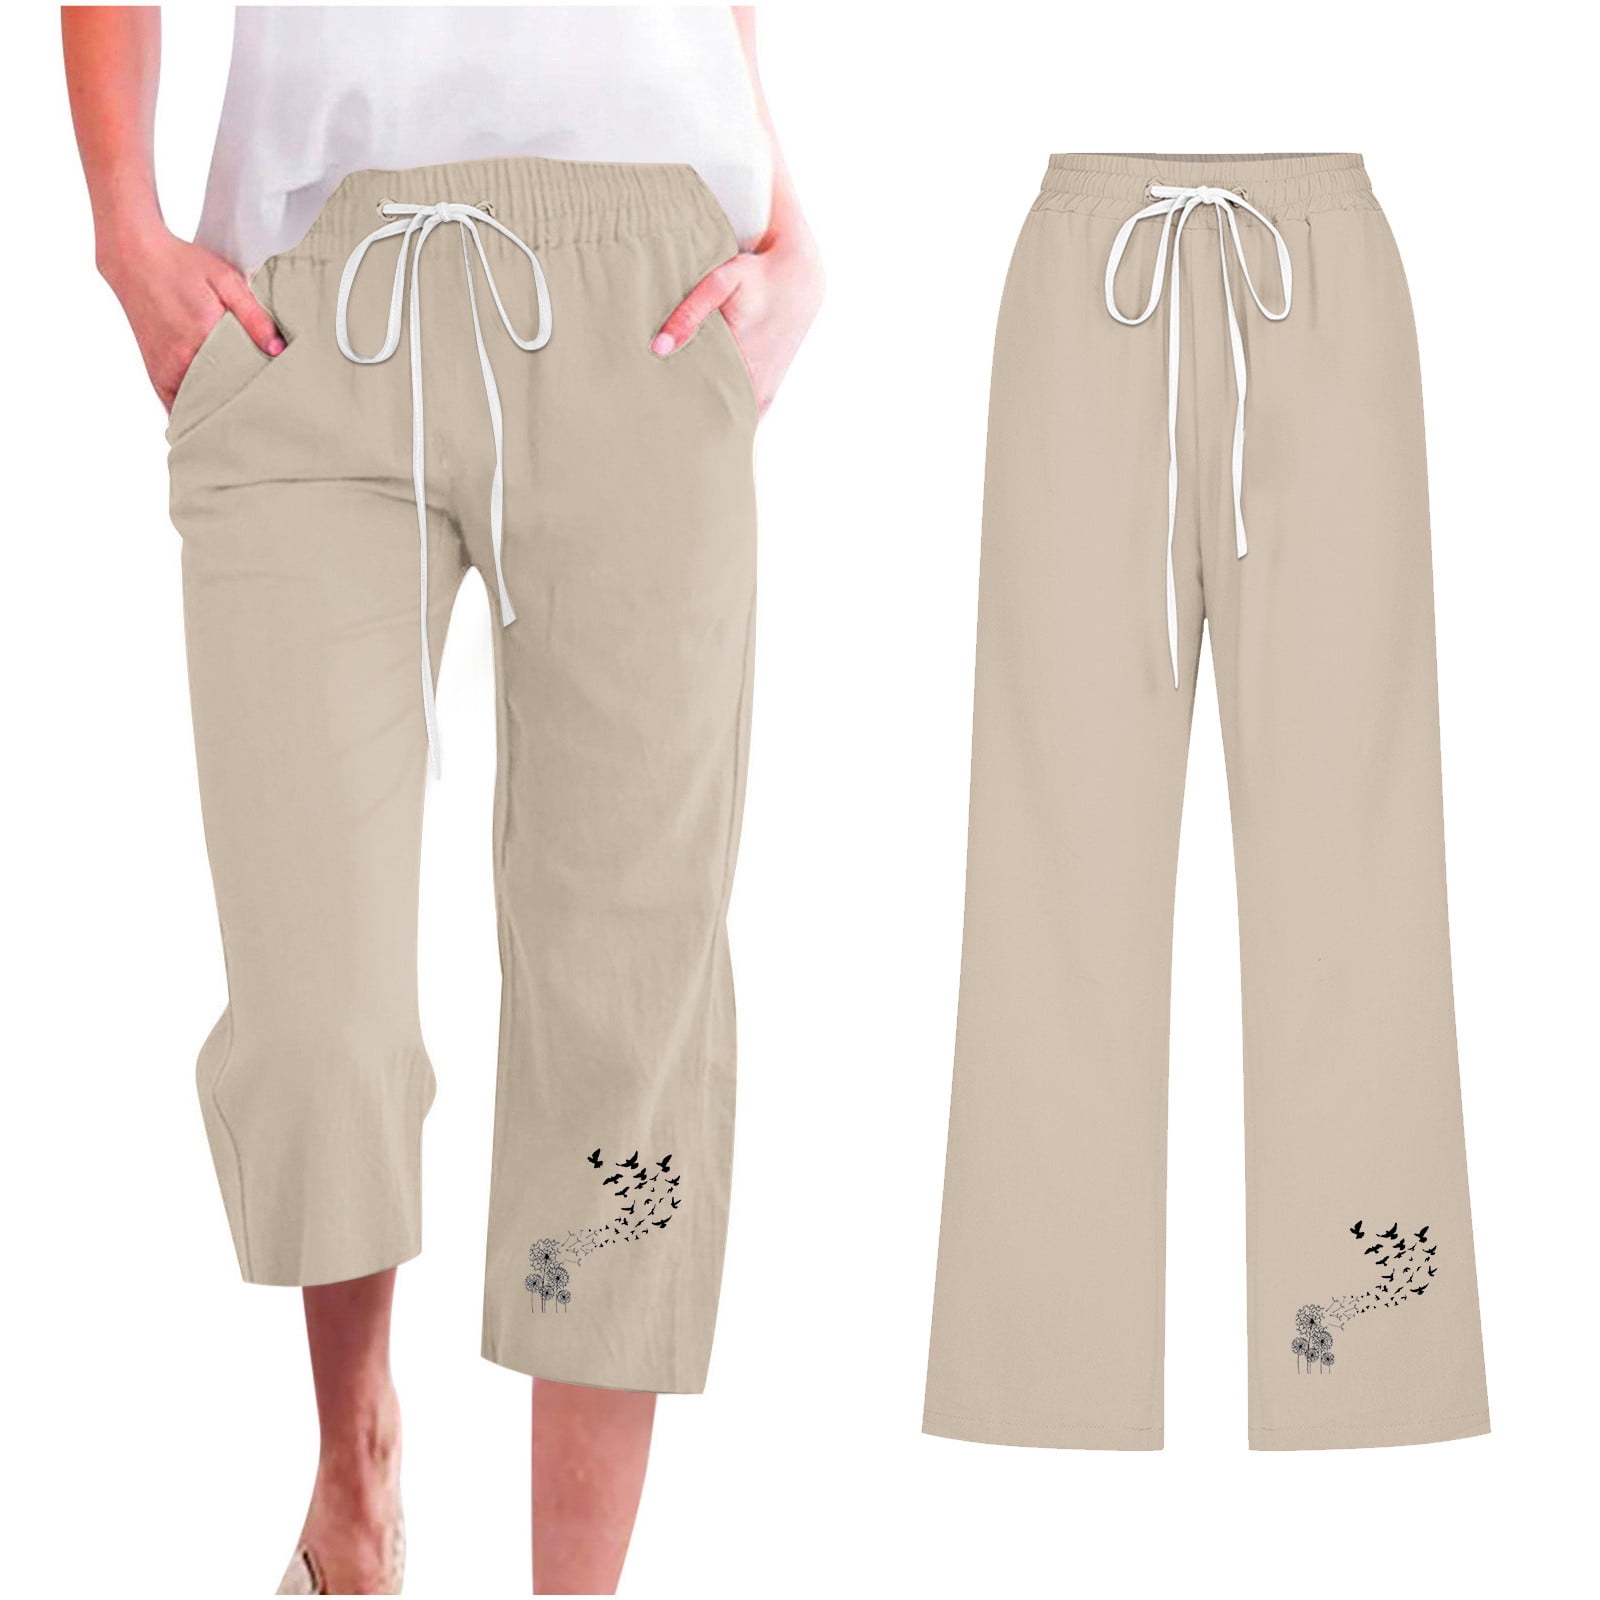 Fnochy Quilted Women's Pant Capris Pants For Casual Summer Cotton